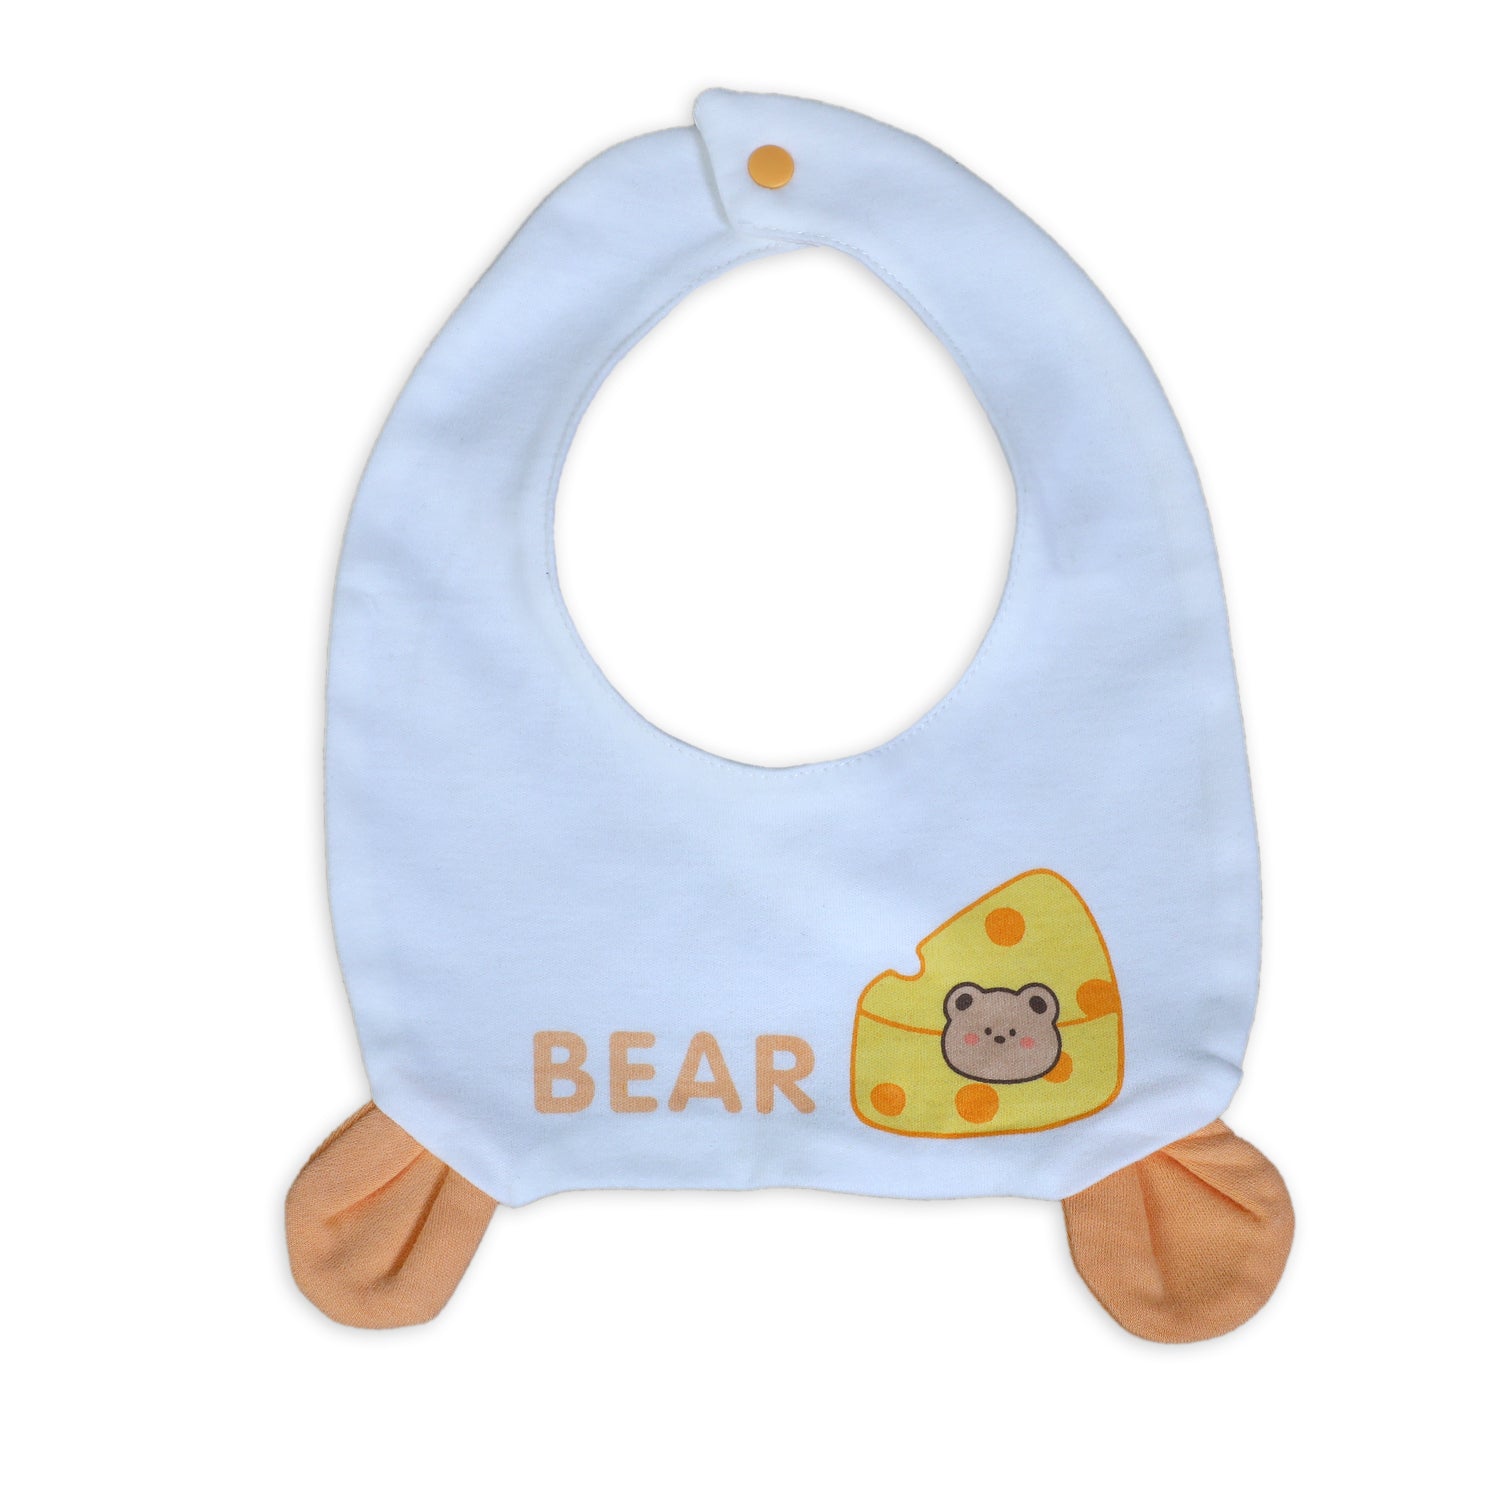 Cute Bear Full Sleeves One-Piece Body Suit With Snap Buttons Tie Knot And Matching Bib - Orange